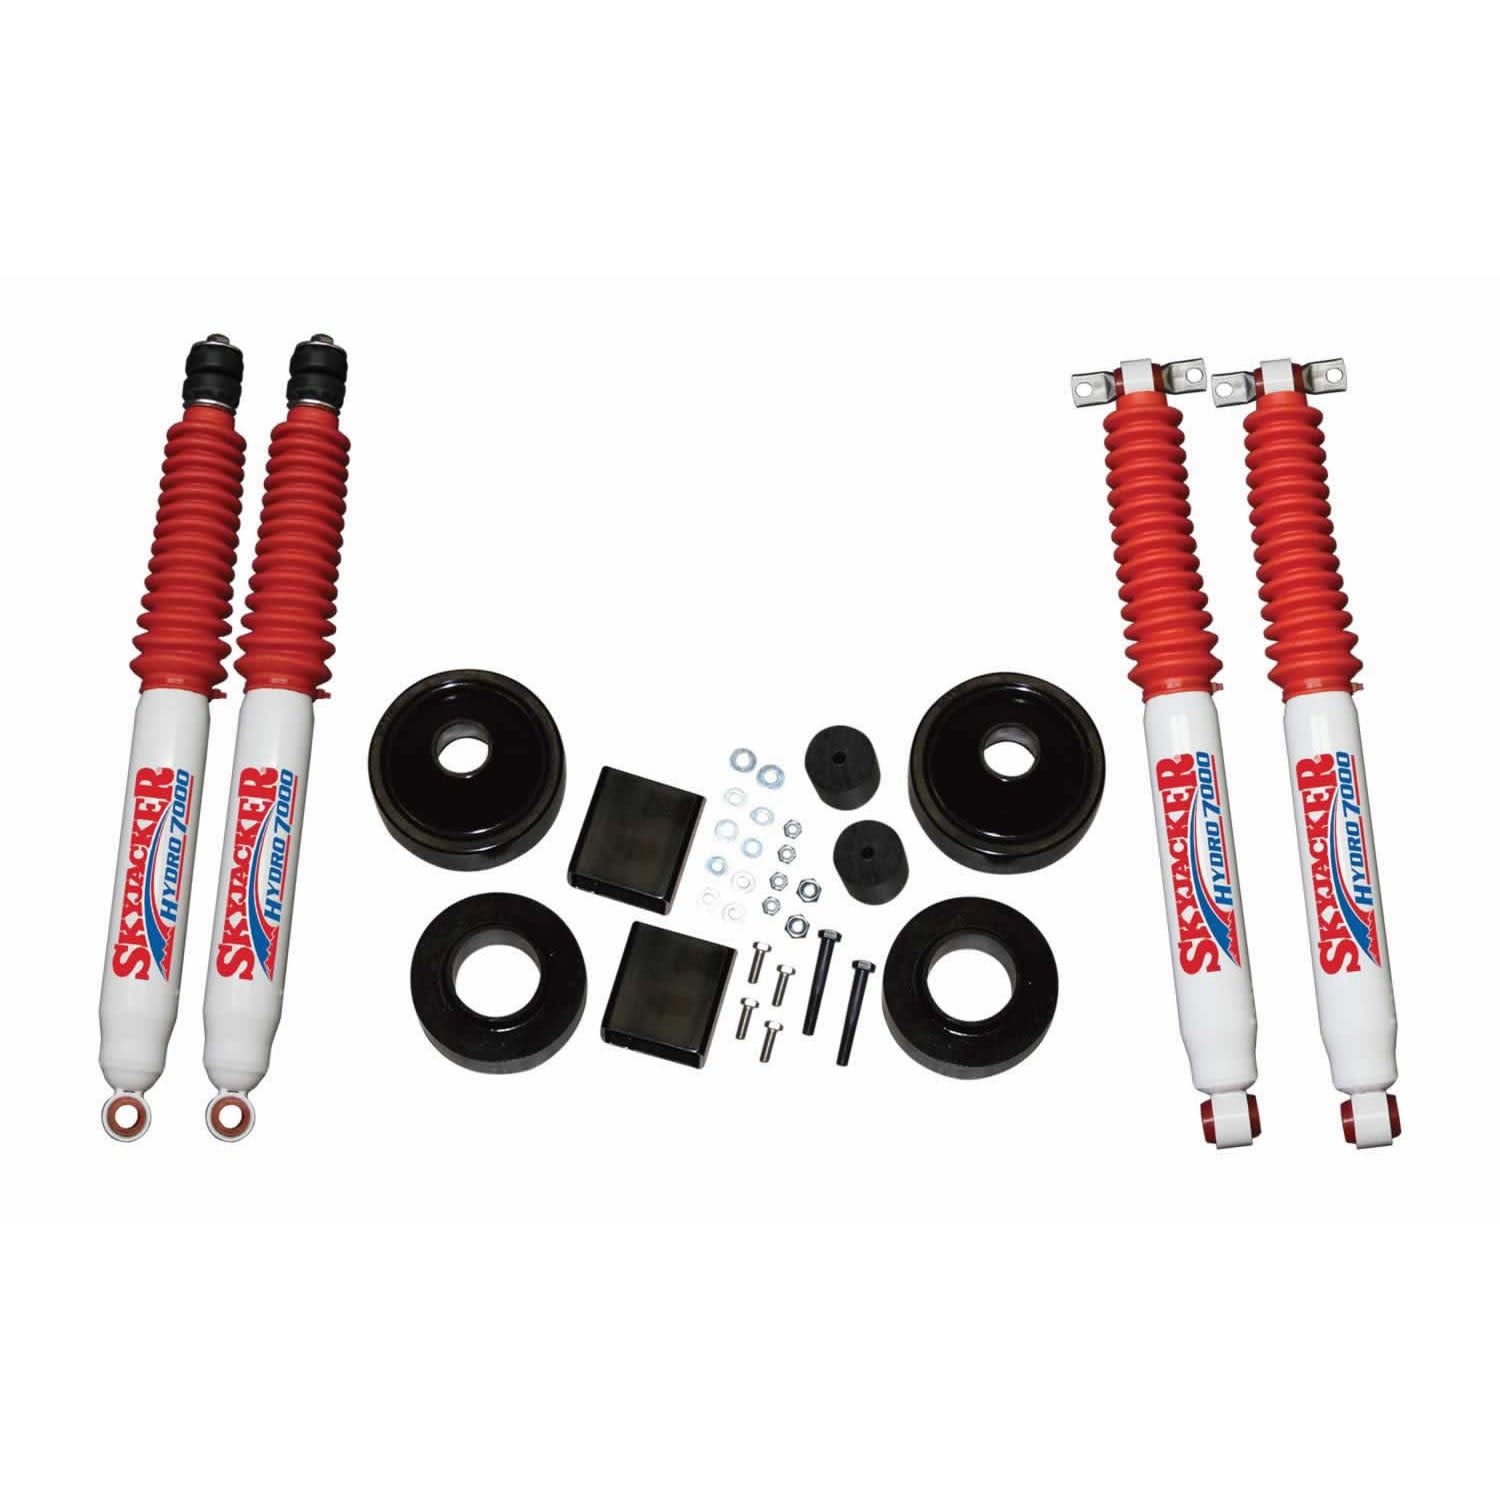 Suspension Lift Kit w/Shock 2 Inch Lift 07-18 Wrangler JK Incl. Front/Rear 2 Inch Polyurethane Coil Spring Spacers w/Bump Stop Spacers Skyjacker